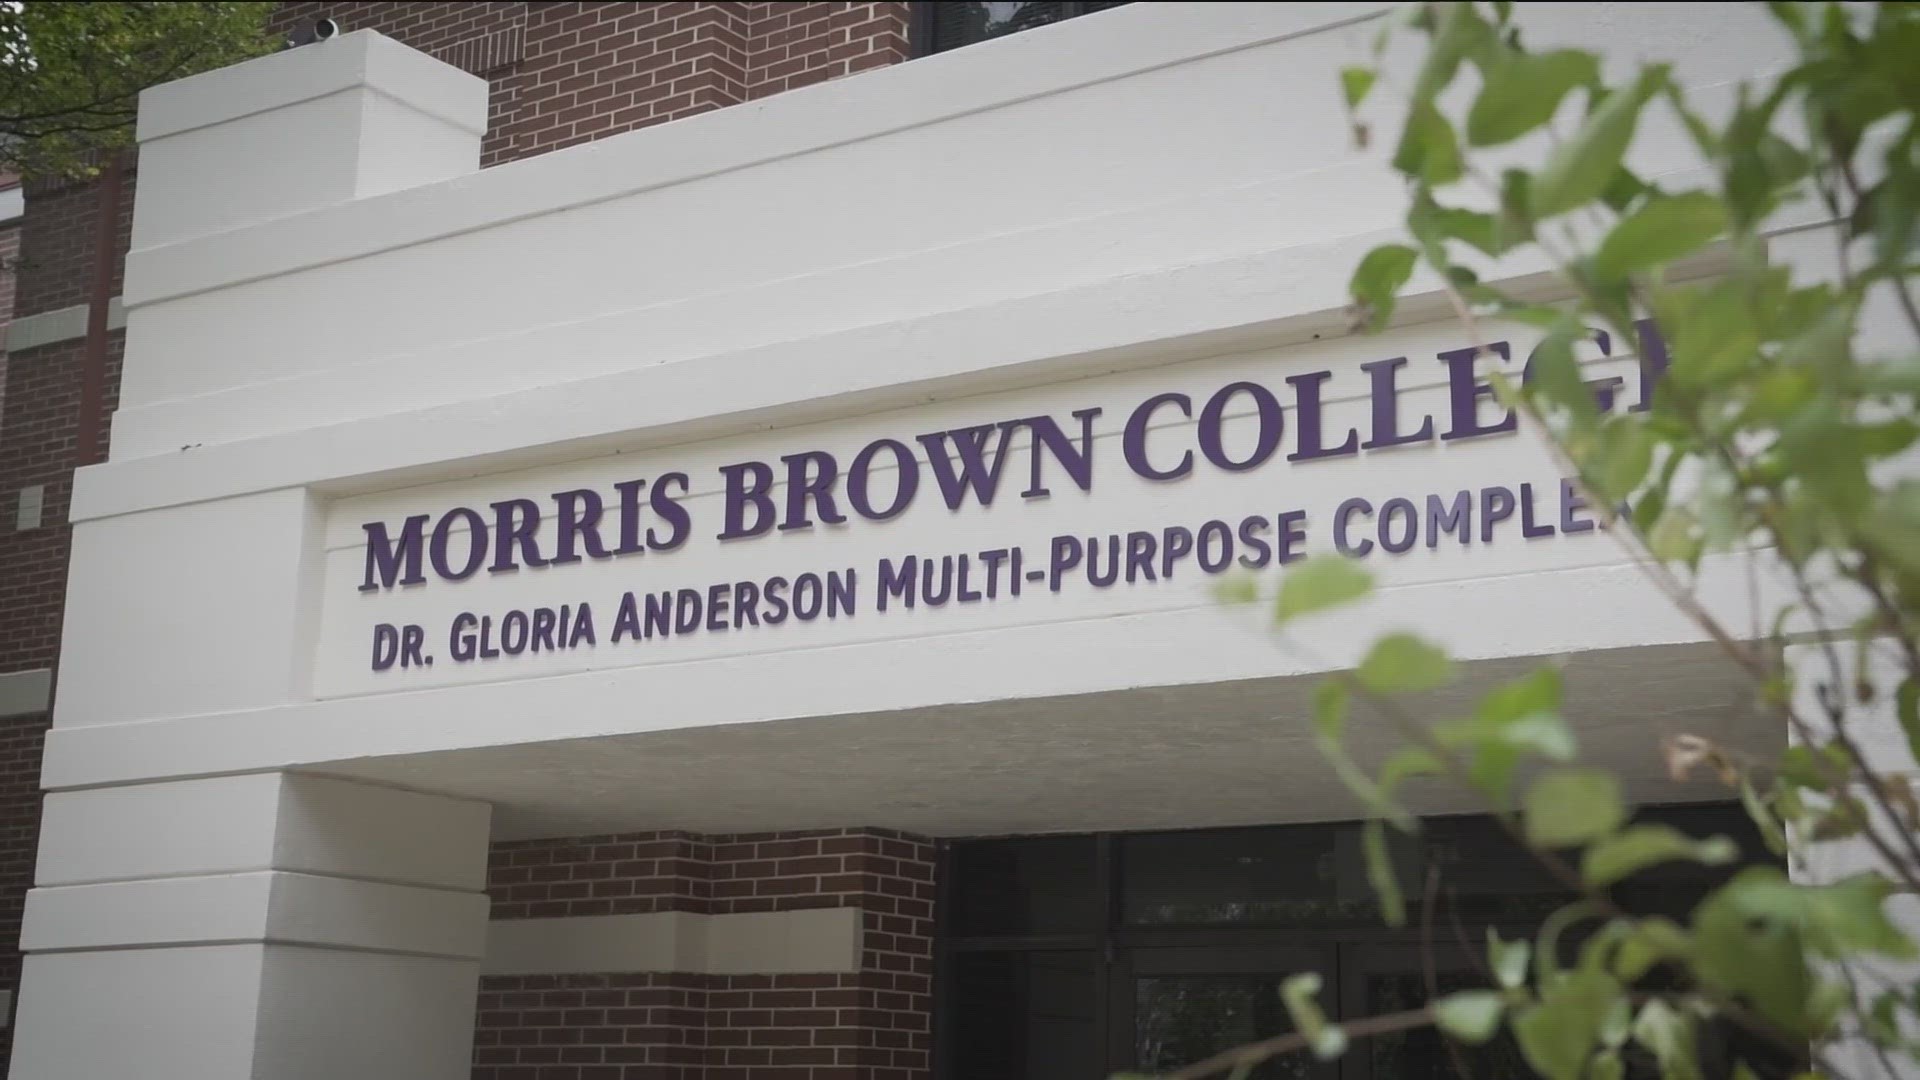 After losing its accreditation, Morris Brown fought to get it back - and now its thriving.